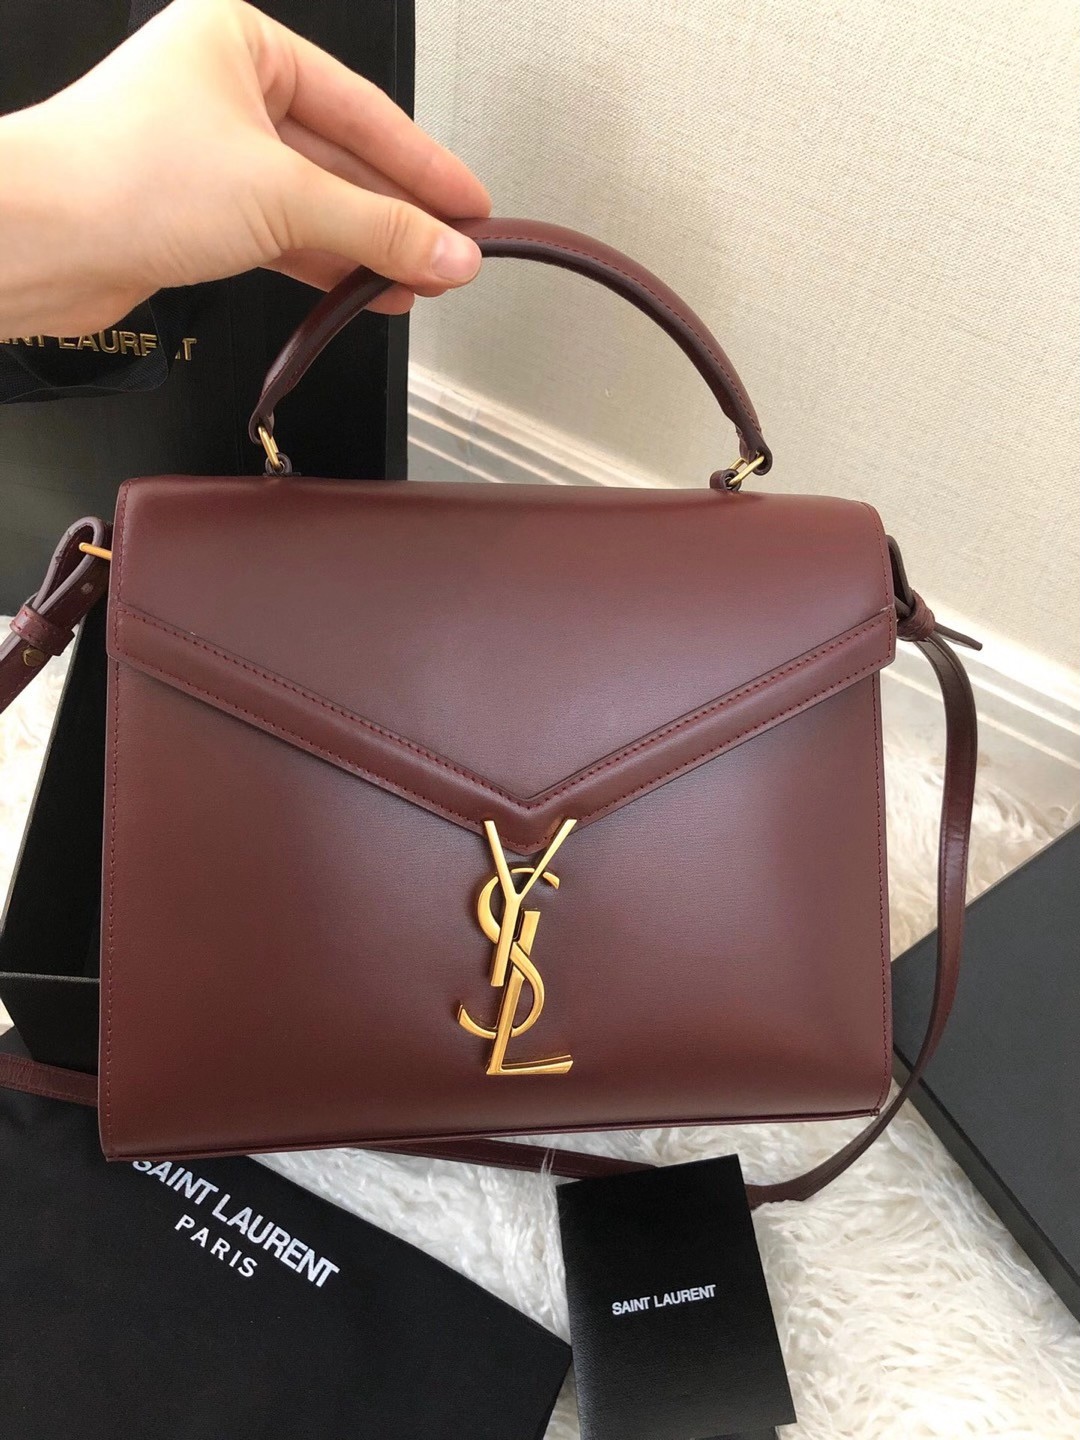 BORDEAUX YSL CASSANDRA MONOGRAM CLASP IN SMOOTH LEATHER - Replica Bags ...